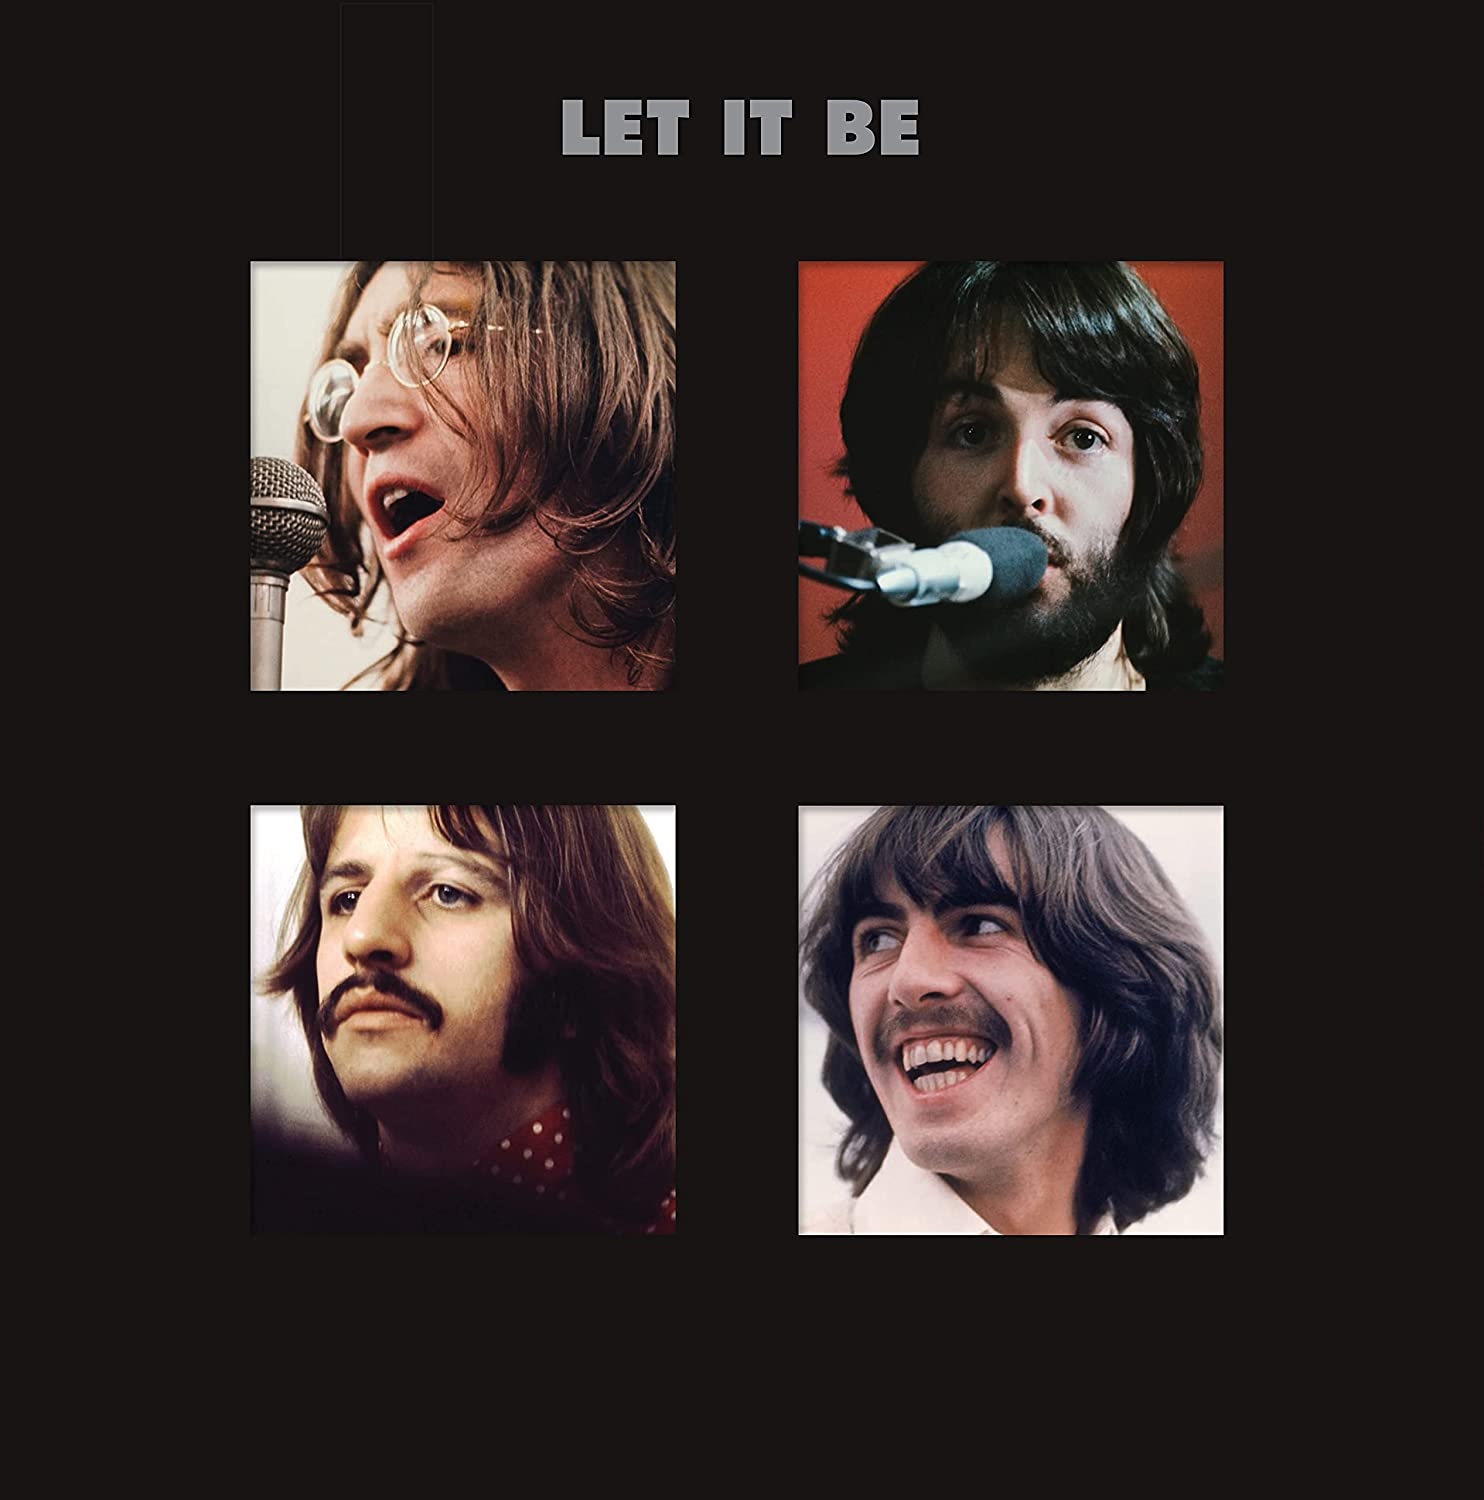 Four squares; top left features John Lennon singing, top right features Paul McCartney singing, bottom left shows Ringo Starr looking serious, bottom right depicts George Harrison smiling and looking over his right shoulder. This is the album cover of The Beatles' Let It Be.